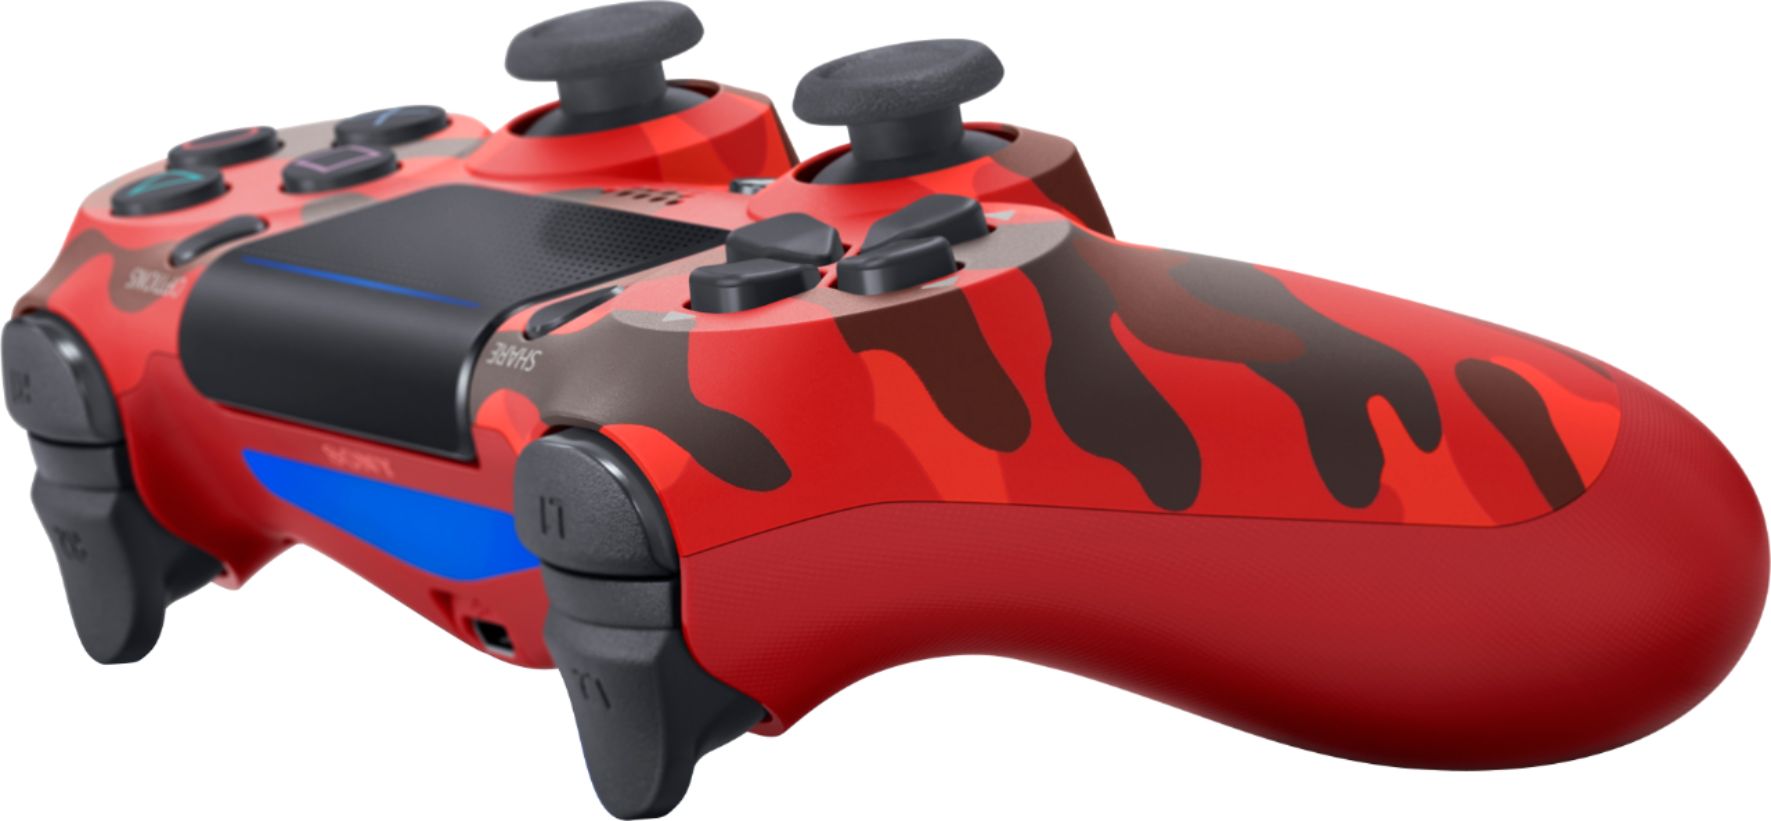 red ps4 controller camo